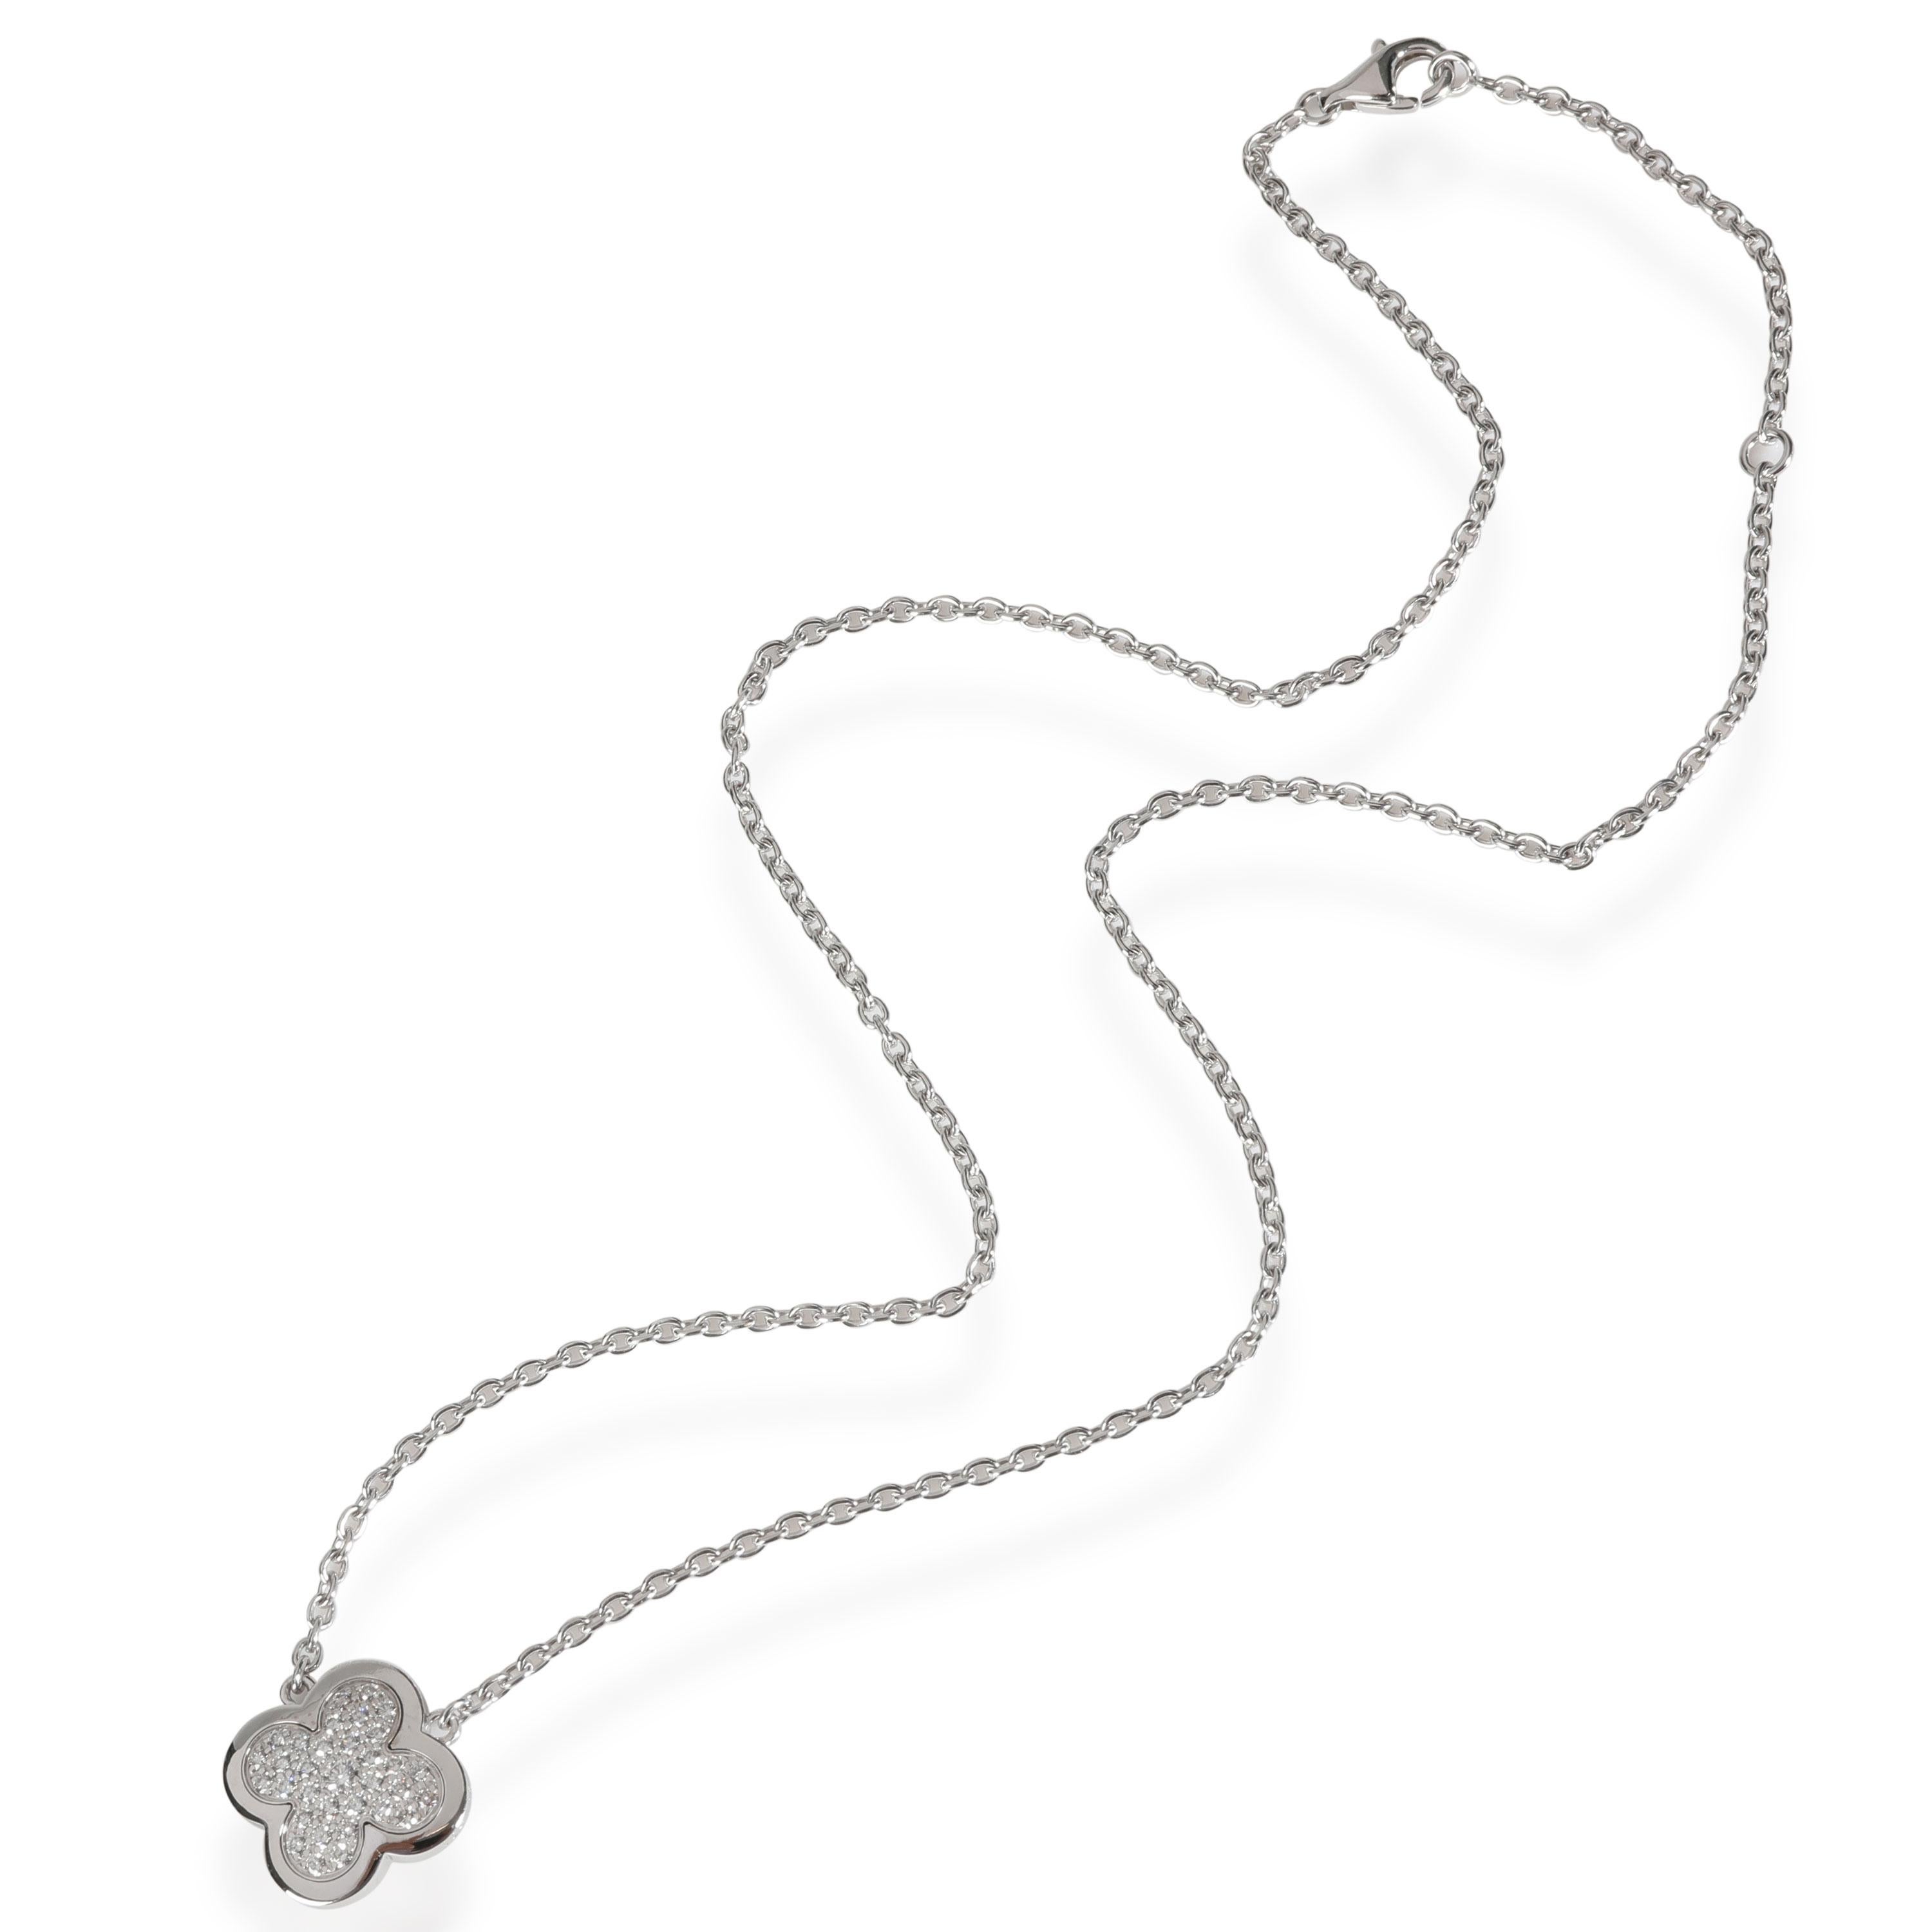 Van Cleef & Arpels Alhambra Diamond Pendant in 18k White Gold 0.35 CTW

PRIMARY DETAILS
SKU: 114438
Listing Title: Van Cleef & Arpels Alhambra Diamond Pendant in 18k White Gold 0.35 CTW
Condition Description: Length is adjustable. Retails for USD